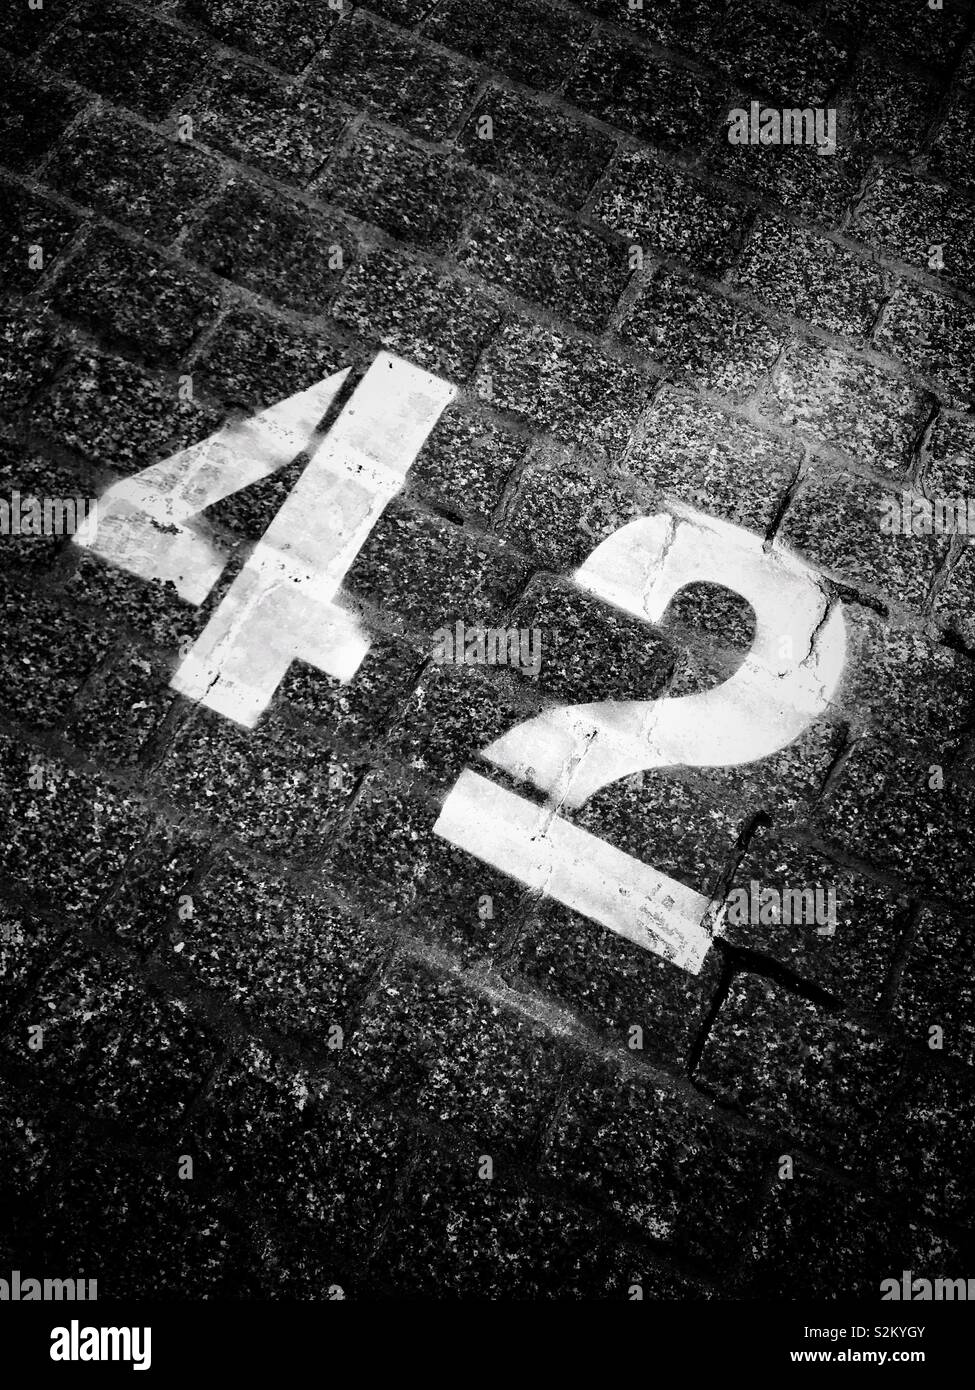 The No. 42 is special - it is “The Answer To The Ultimate Question Of Life, The Universe And Everything” according to the Supercomputer “Deep Thought” in the Douglas Adams novel - THHGTTG. © CH Stock Photo